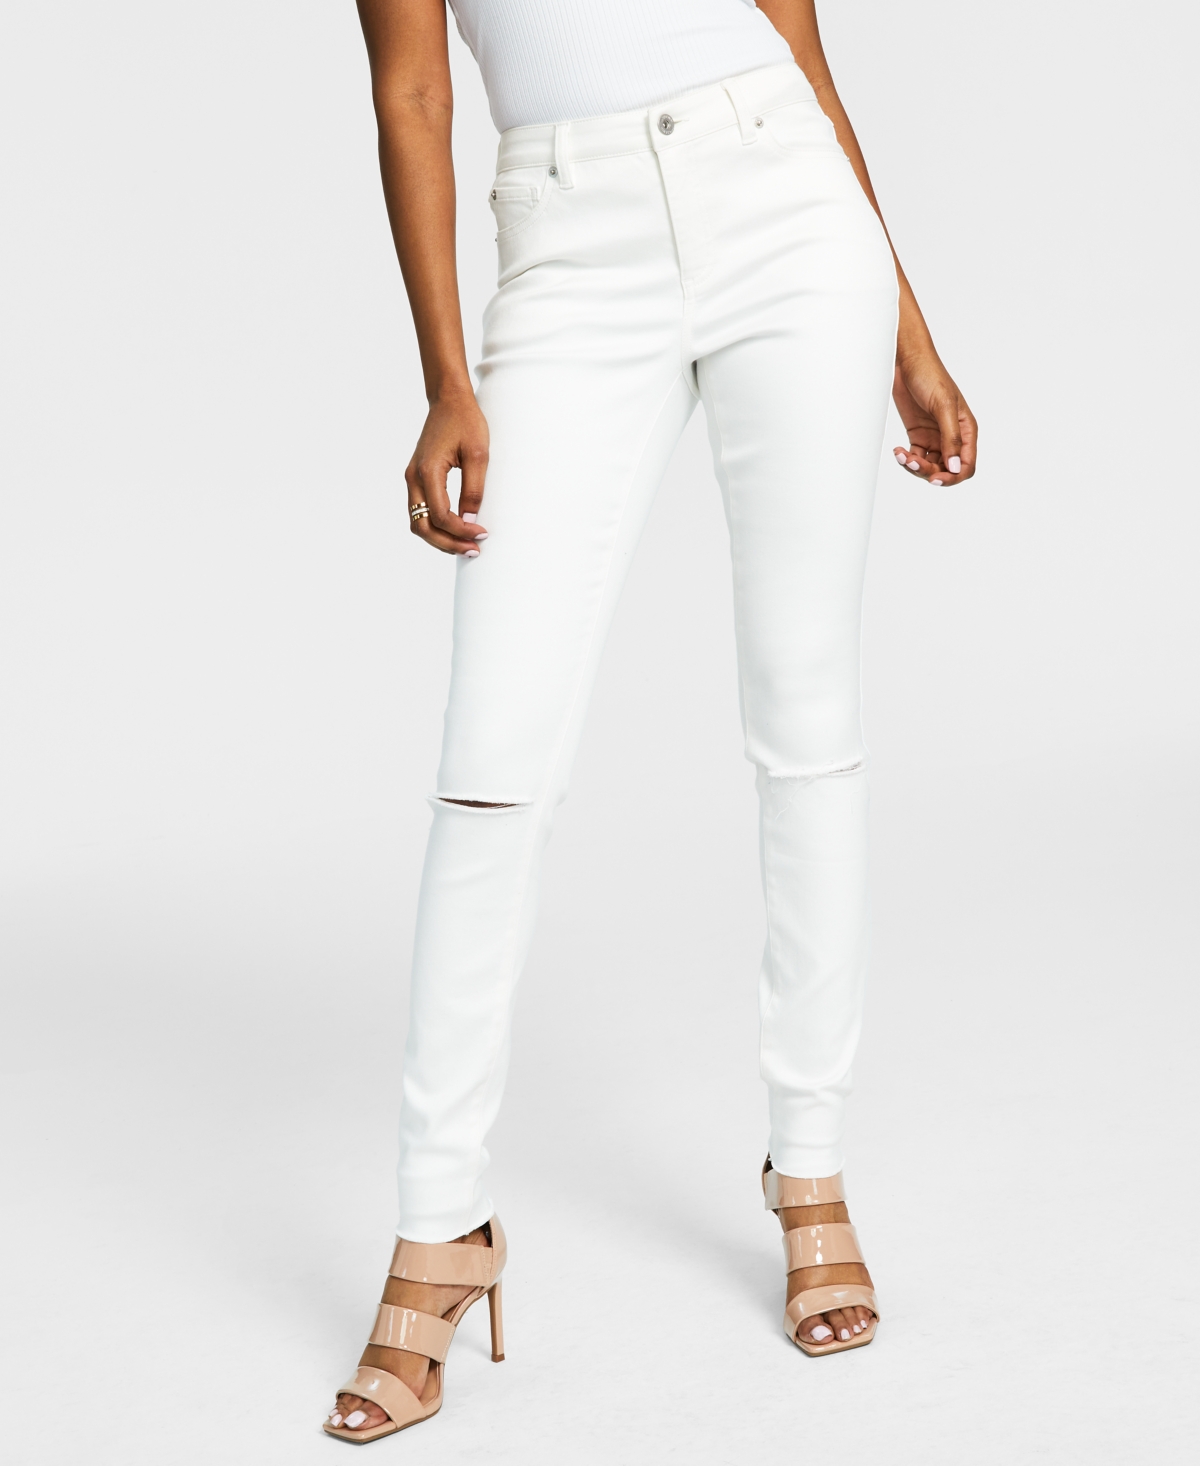  Inc International Concepts Women's Mid-Rise Ripped Skinny Jeans, Created for Macy's